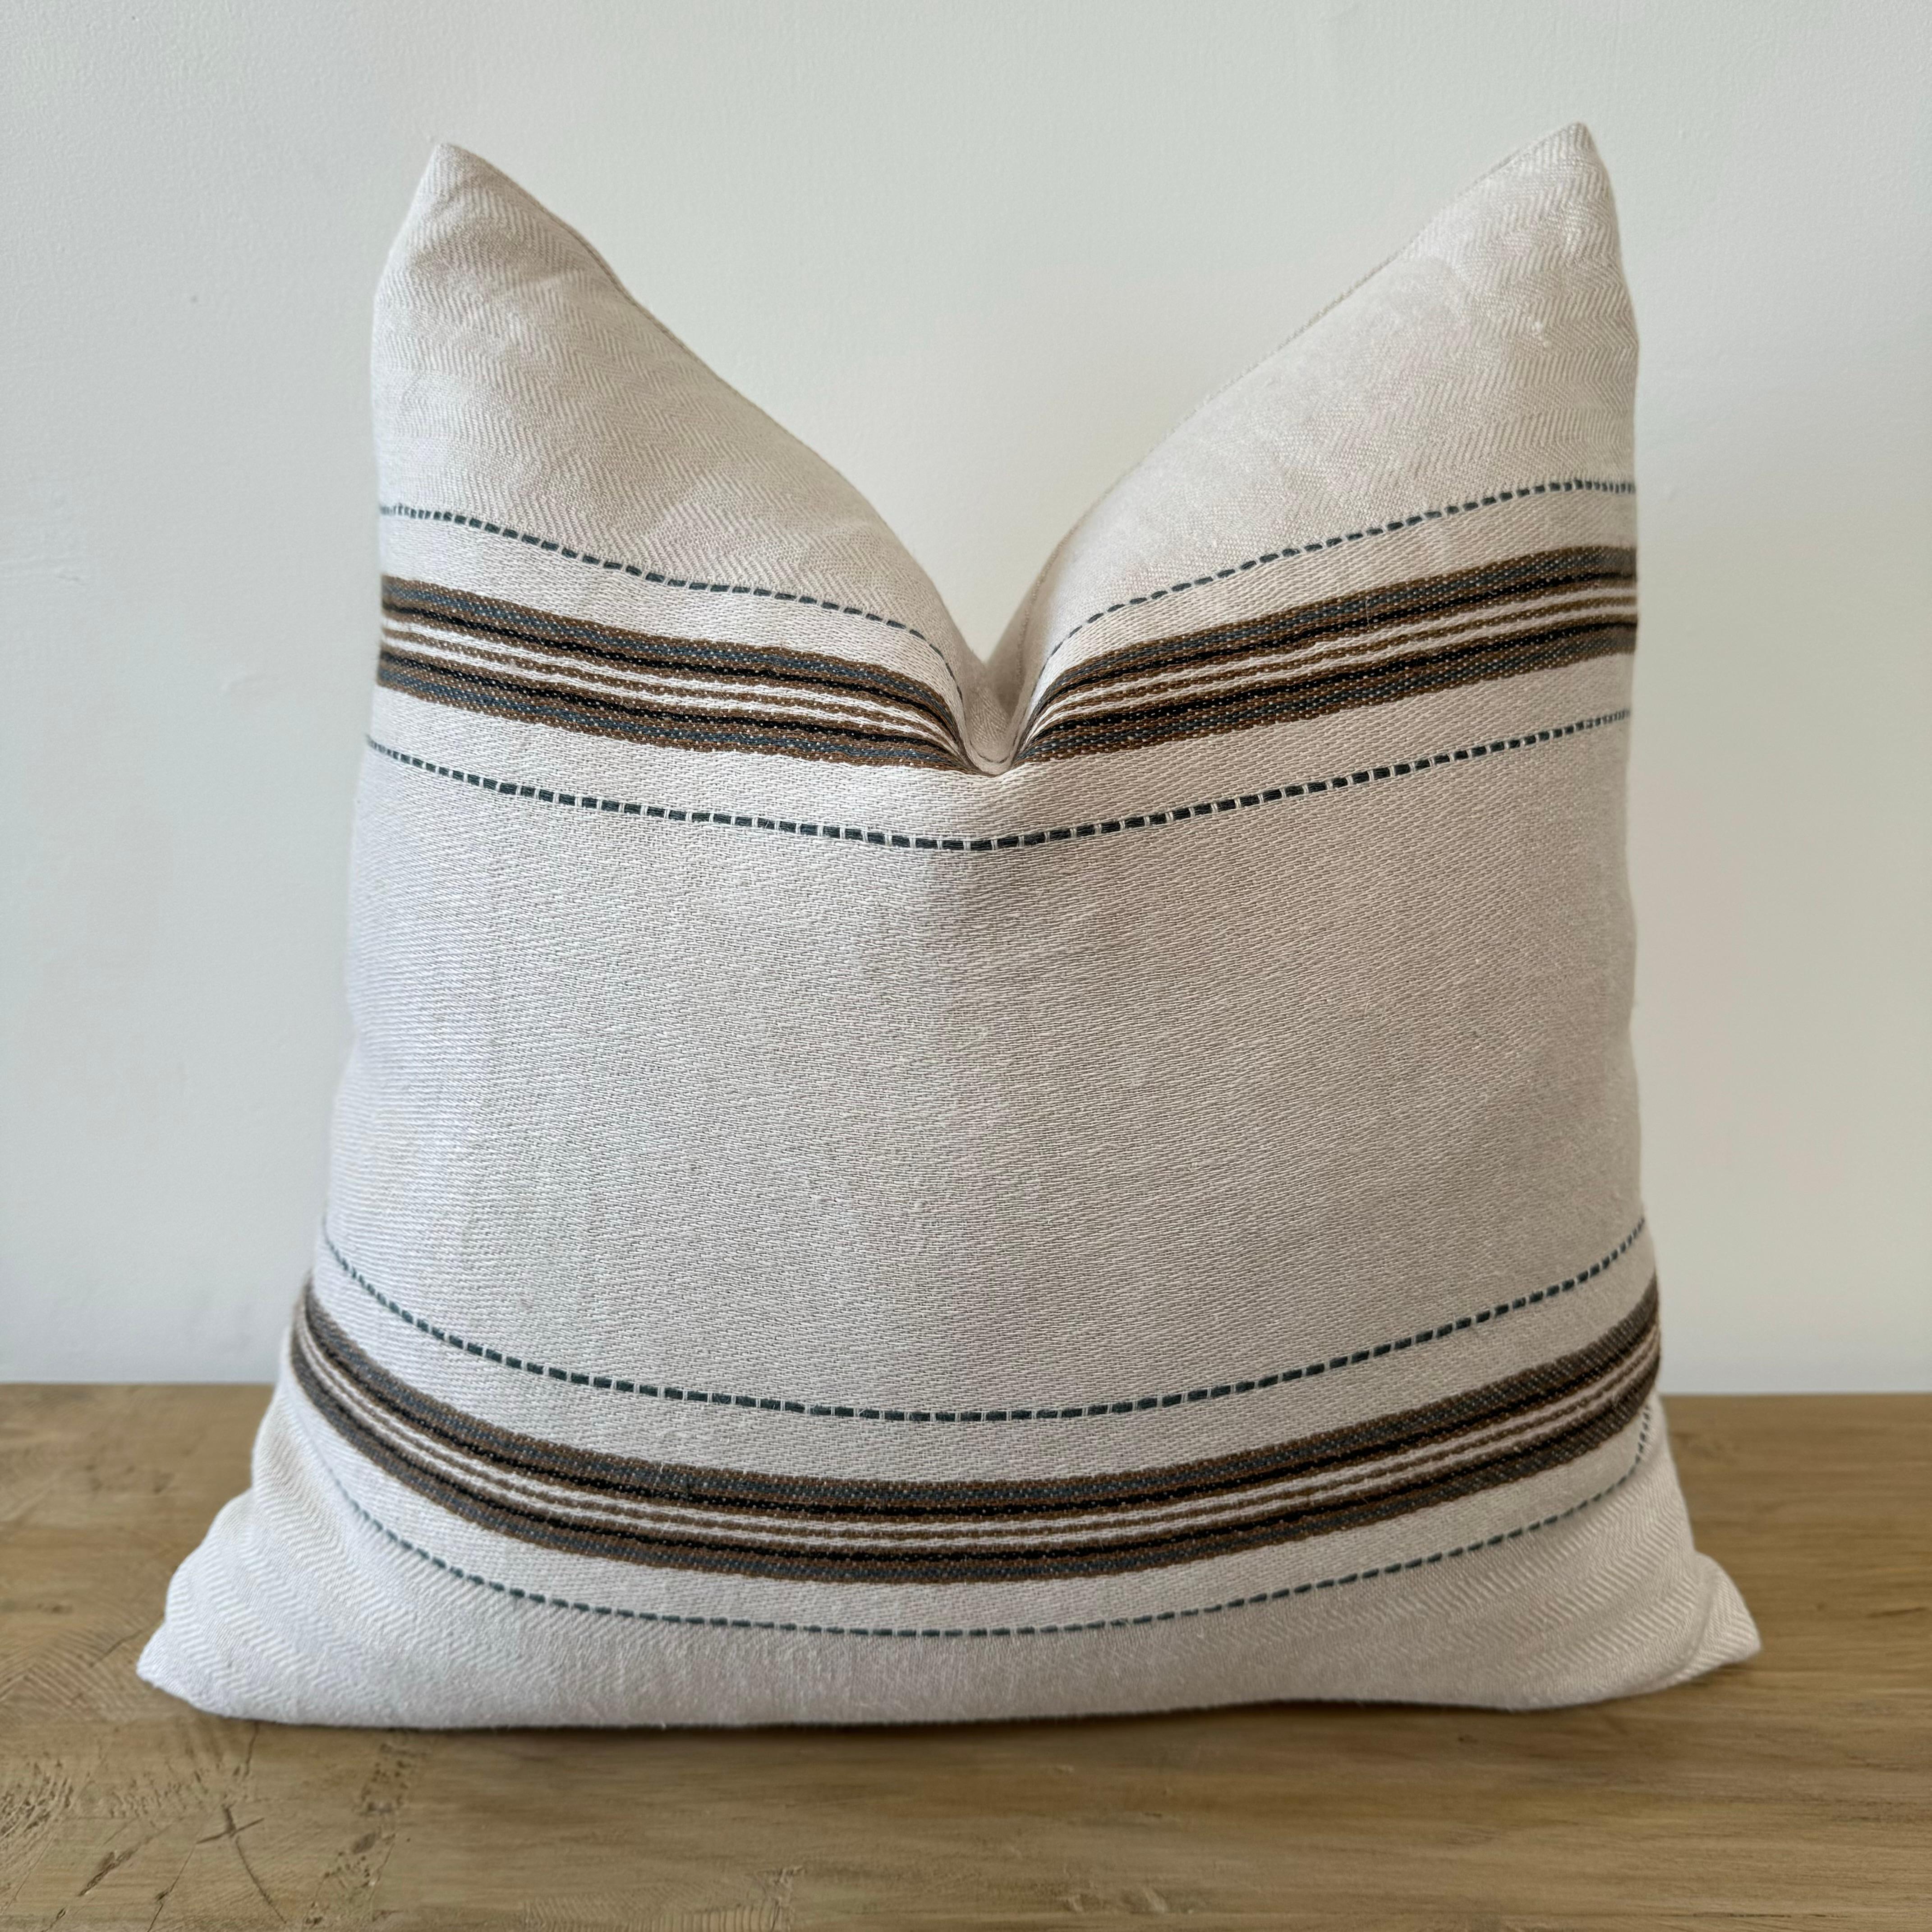 The Tinos pillow features an elevated neutral palette, highlighted by a beautiful slate blue/green. They make a warm addition to any living or bedroom, and have great mix and match versatility. 
Made of 100% Belgian linen they will only get better